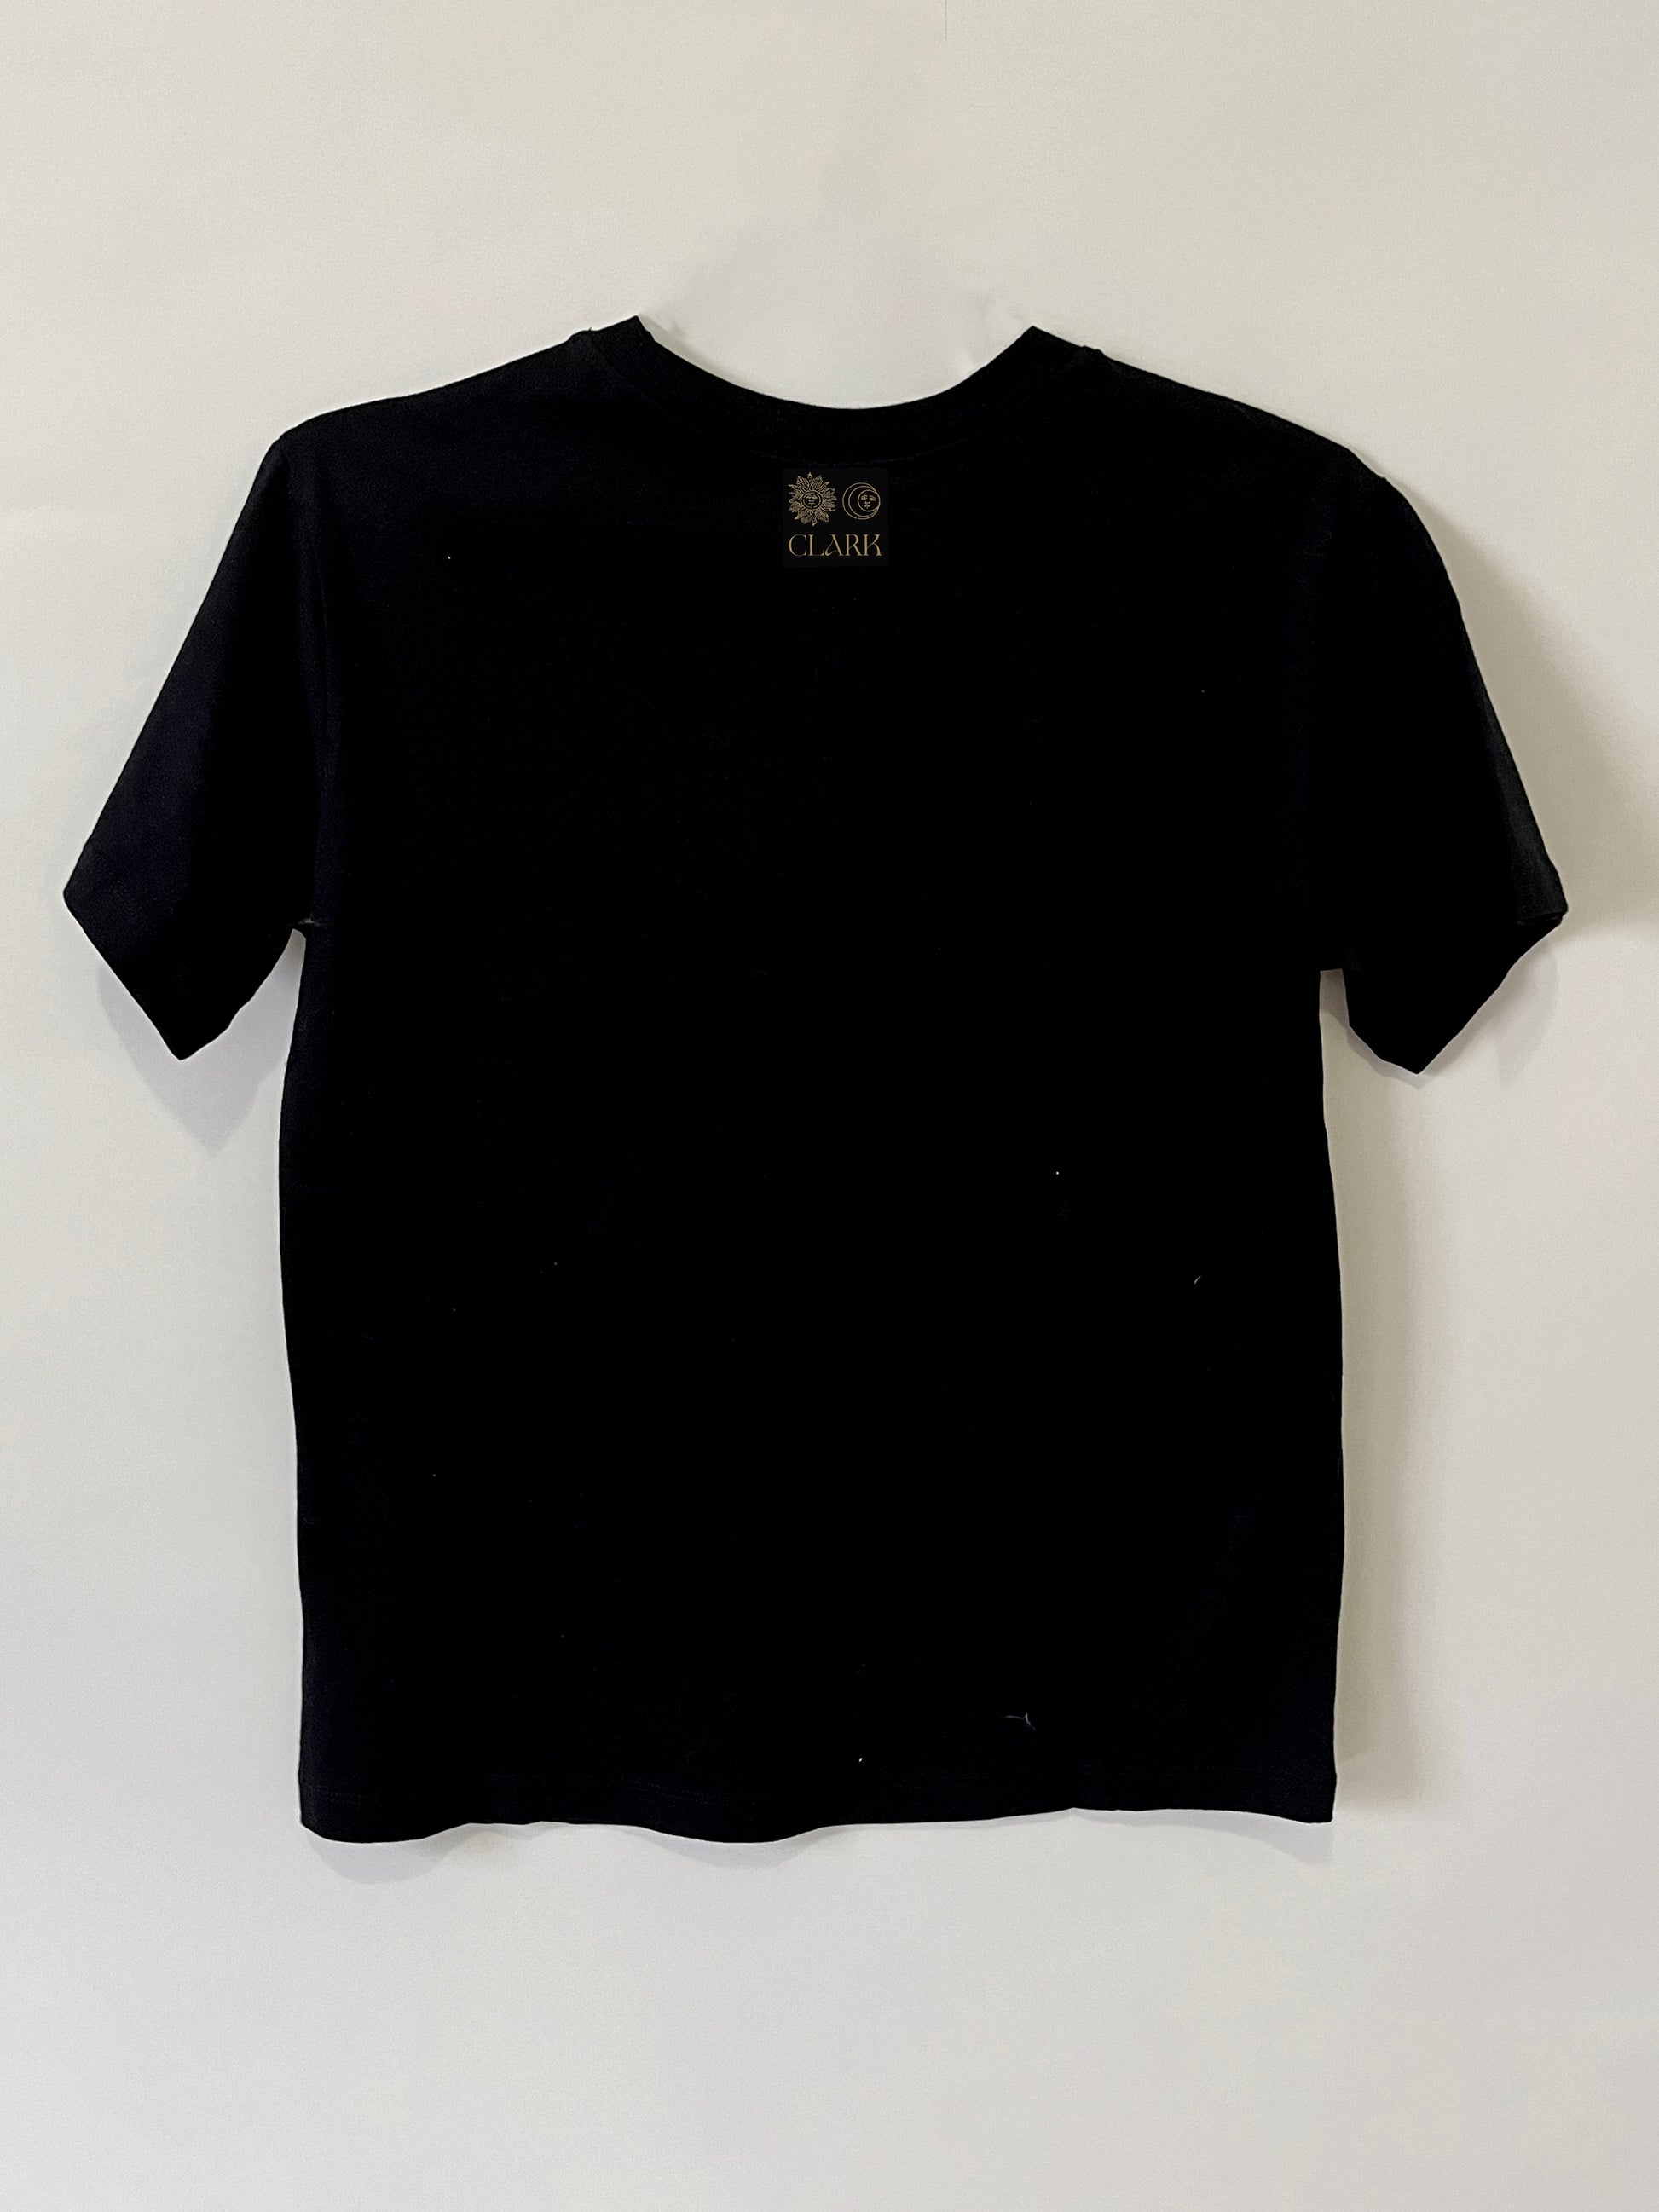 Product photo of Happy As A Clam tee by CLARK. The Back view of straight-cut black tee with CLARK logo printed in gold at neck. Logo is of Sun and Moon with CLARK underneath. 